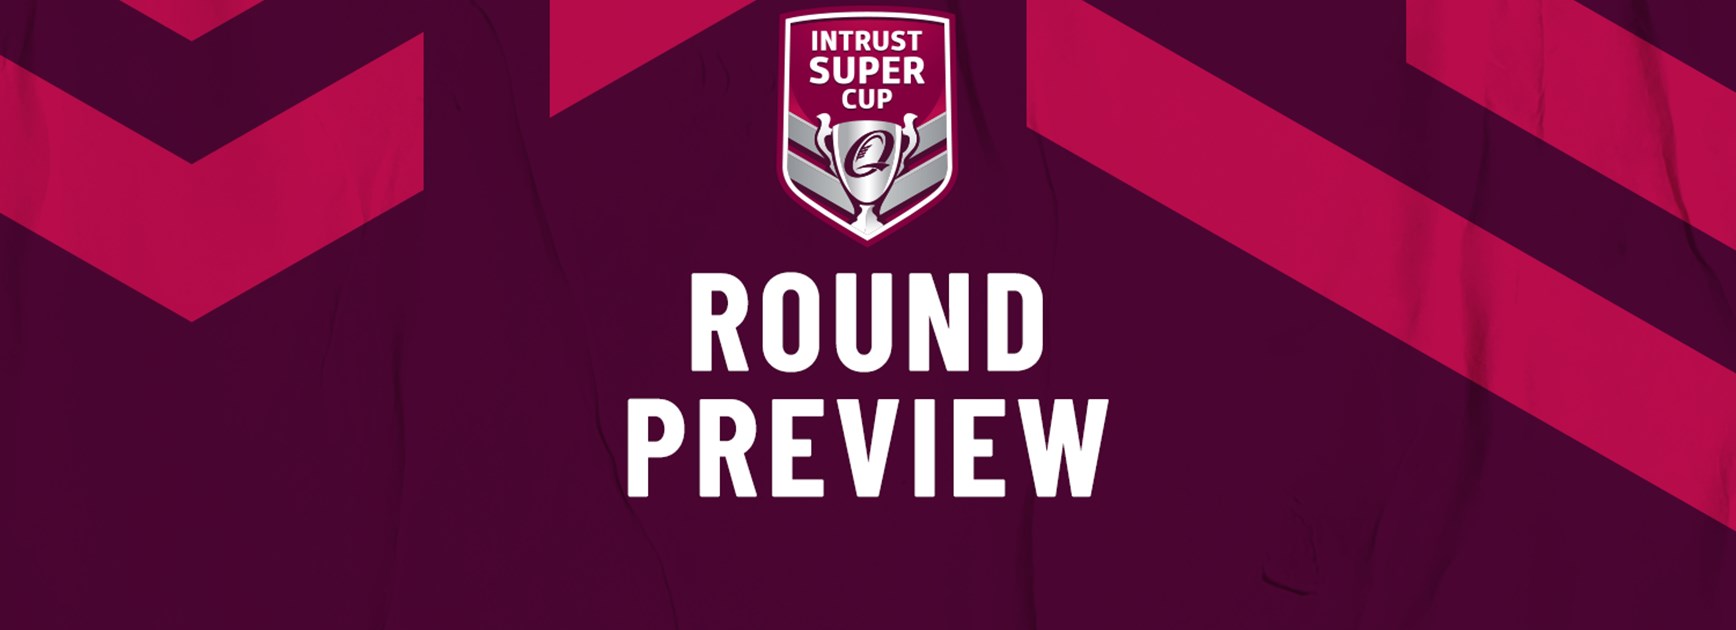 Intrust Super Cup Round 1 preview